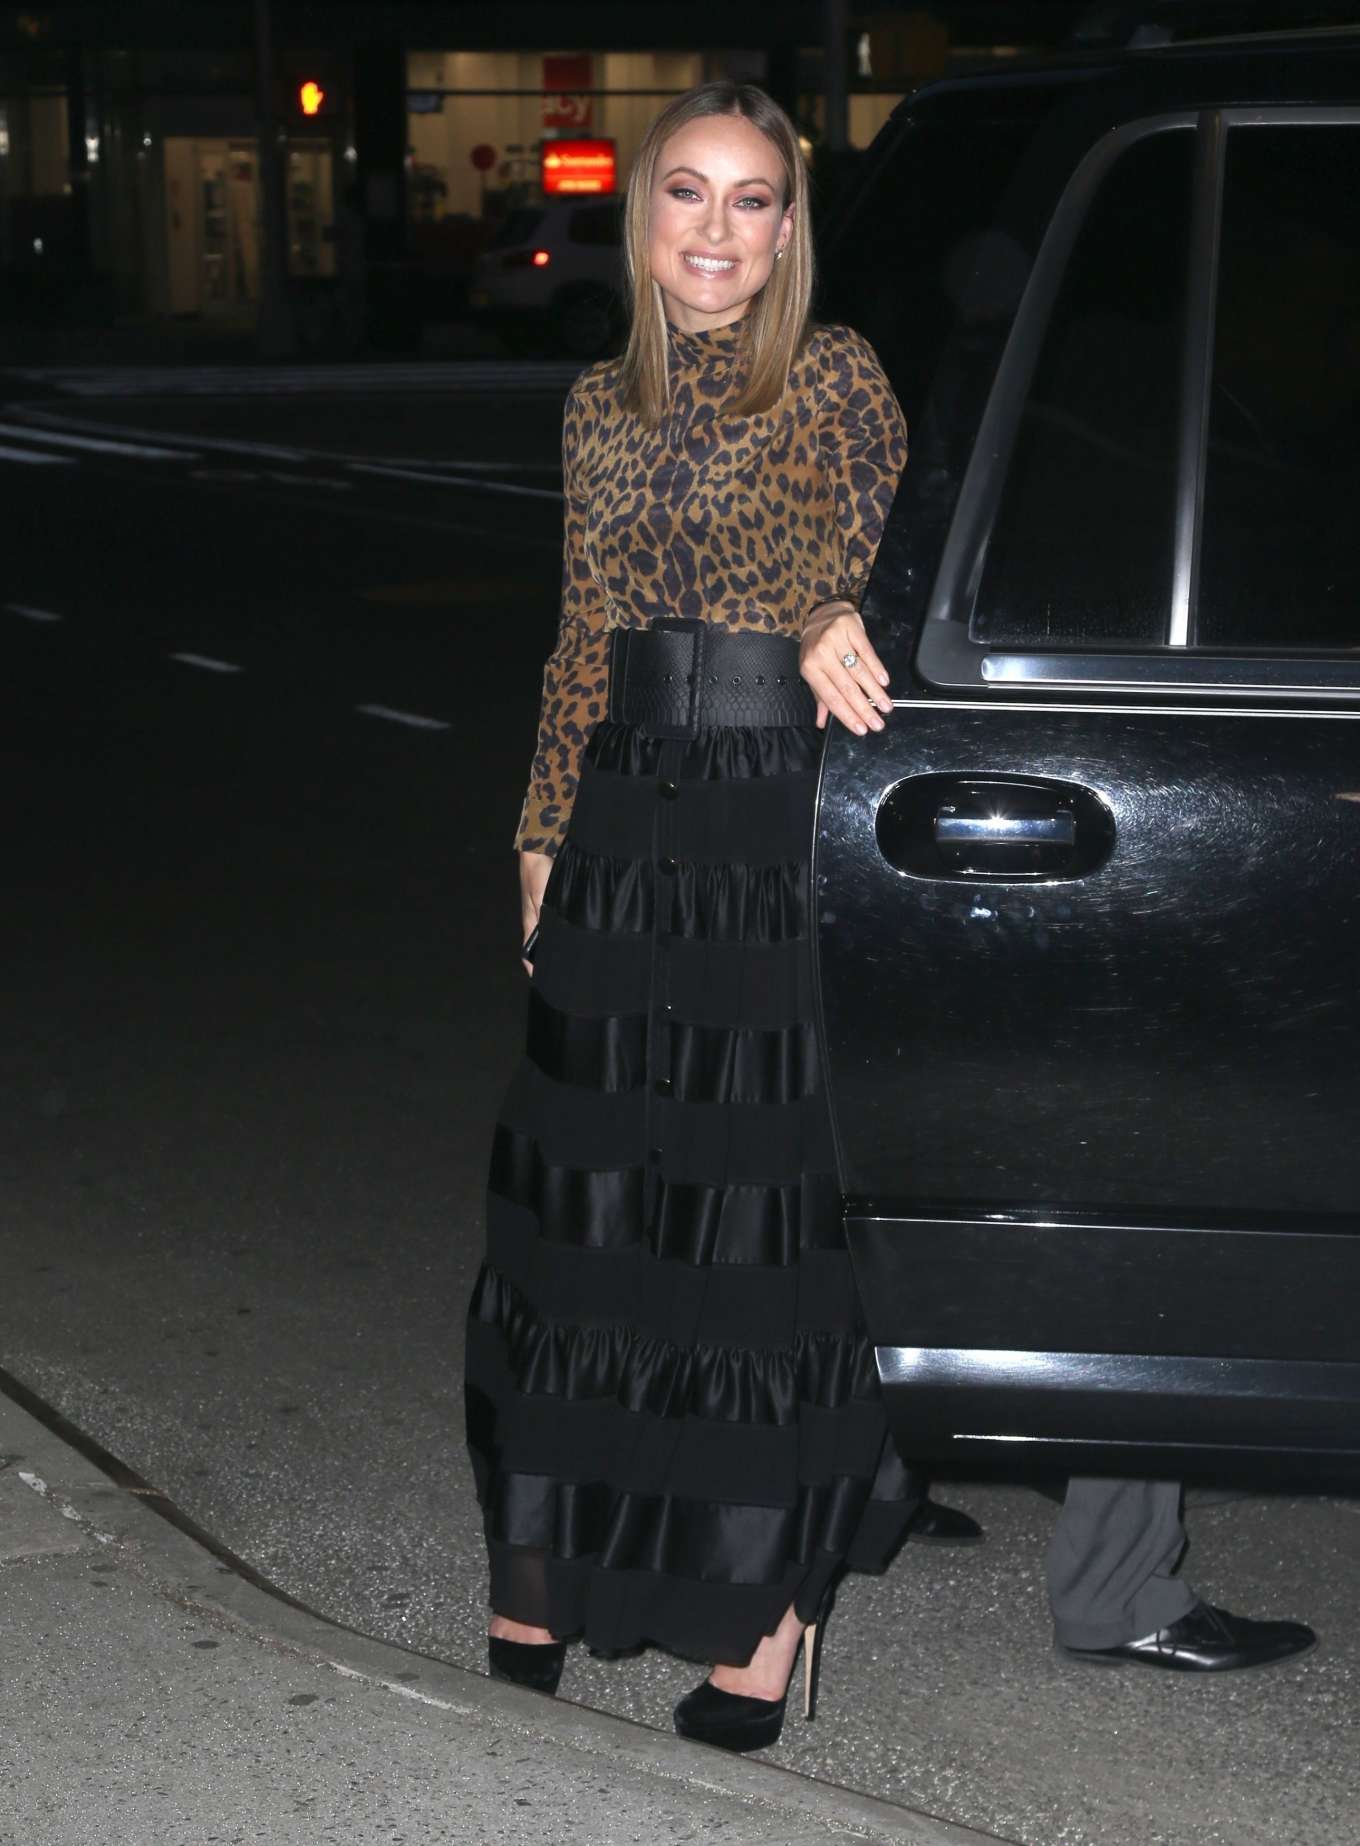 Olivia Wilde in Animal Print Top â€“ Night out in NYC